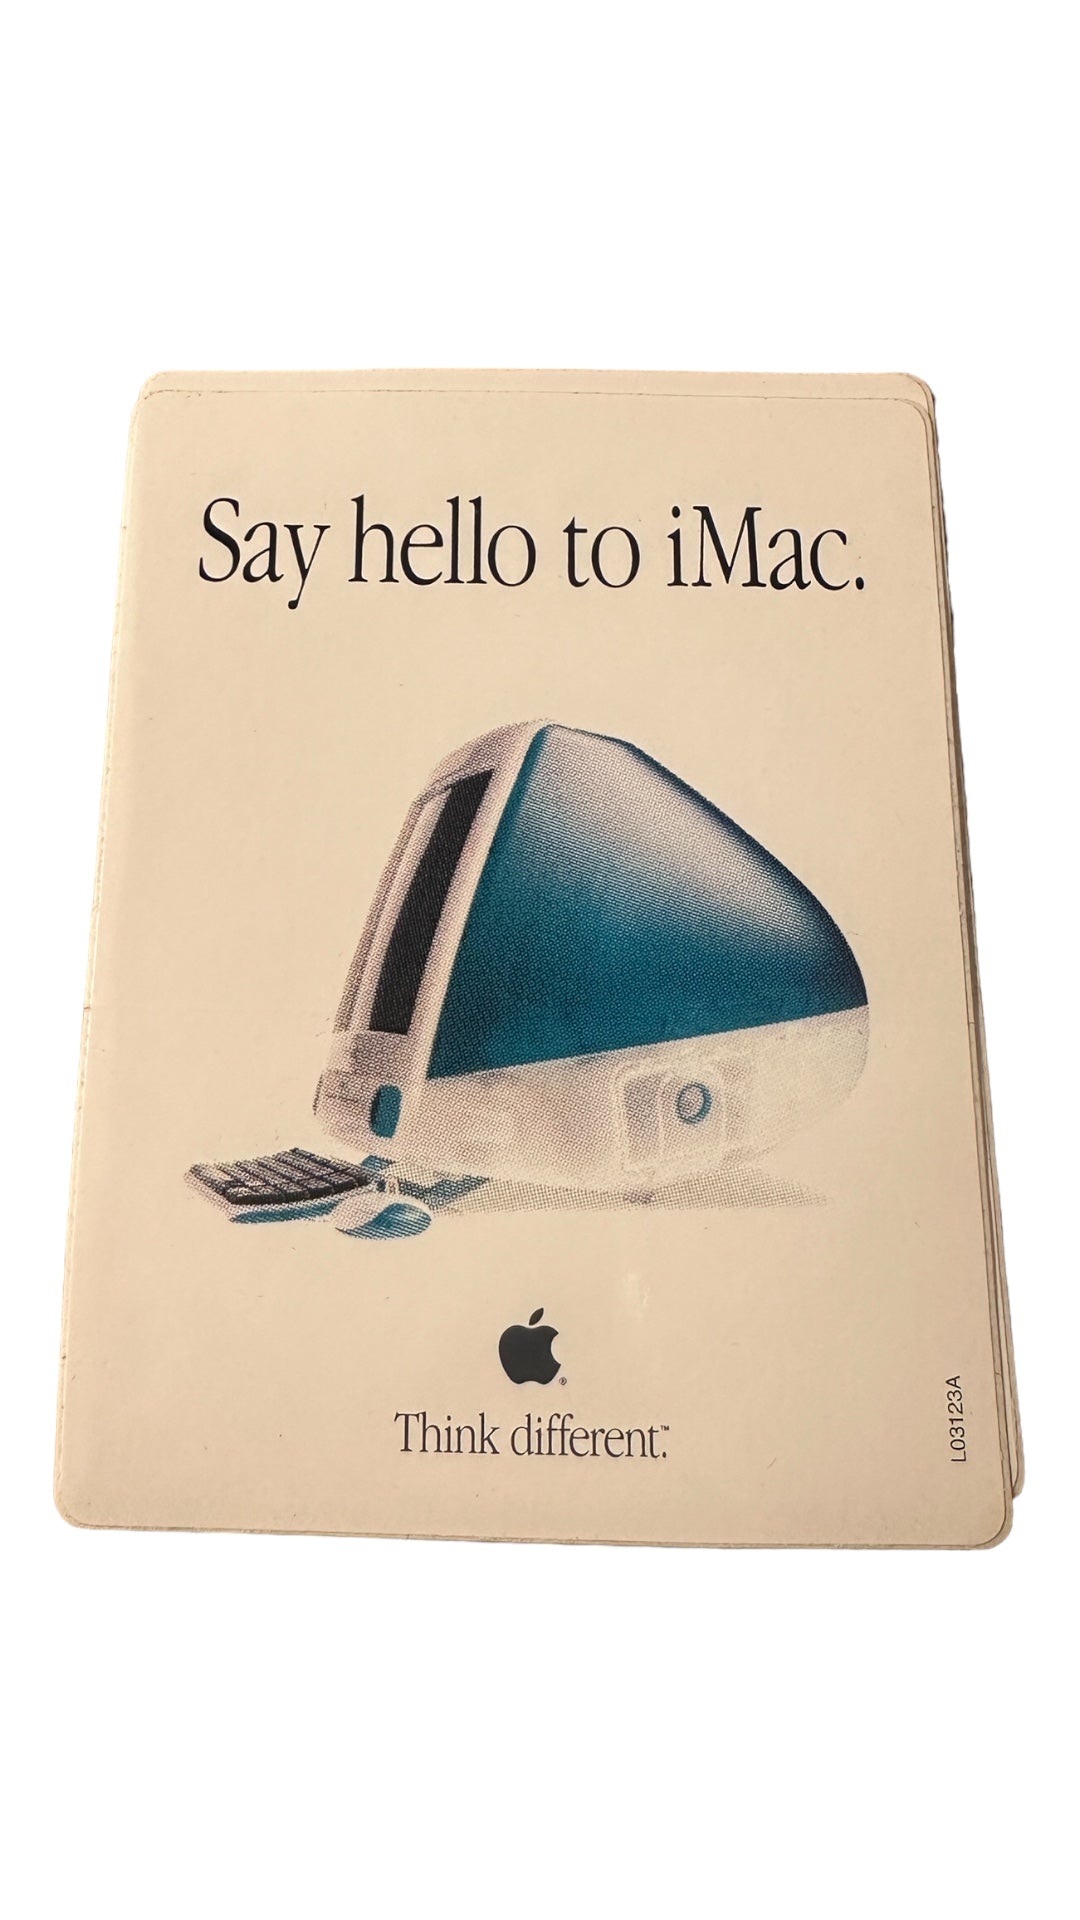 Load image into Gallery viewer, VTG 4x3 IMac G3 Say Hello To Imac Promo Decal Stickers
